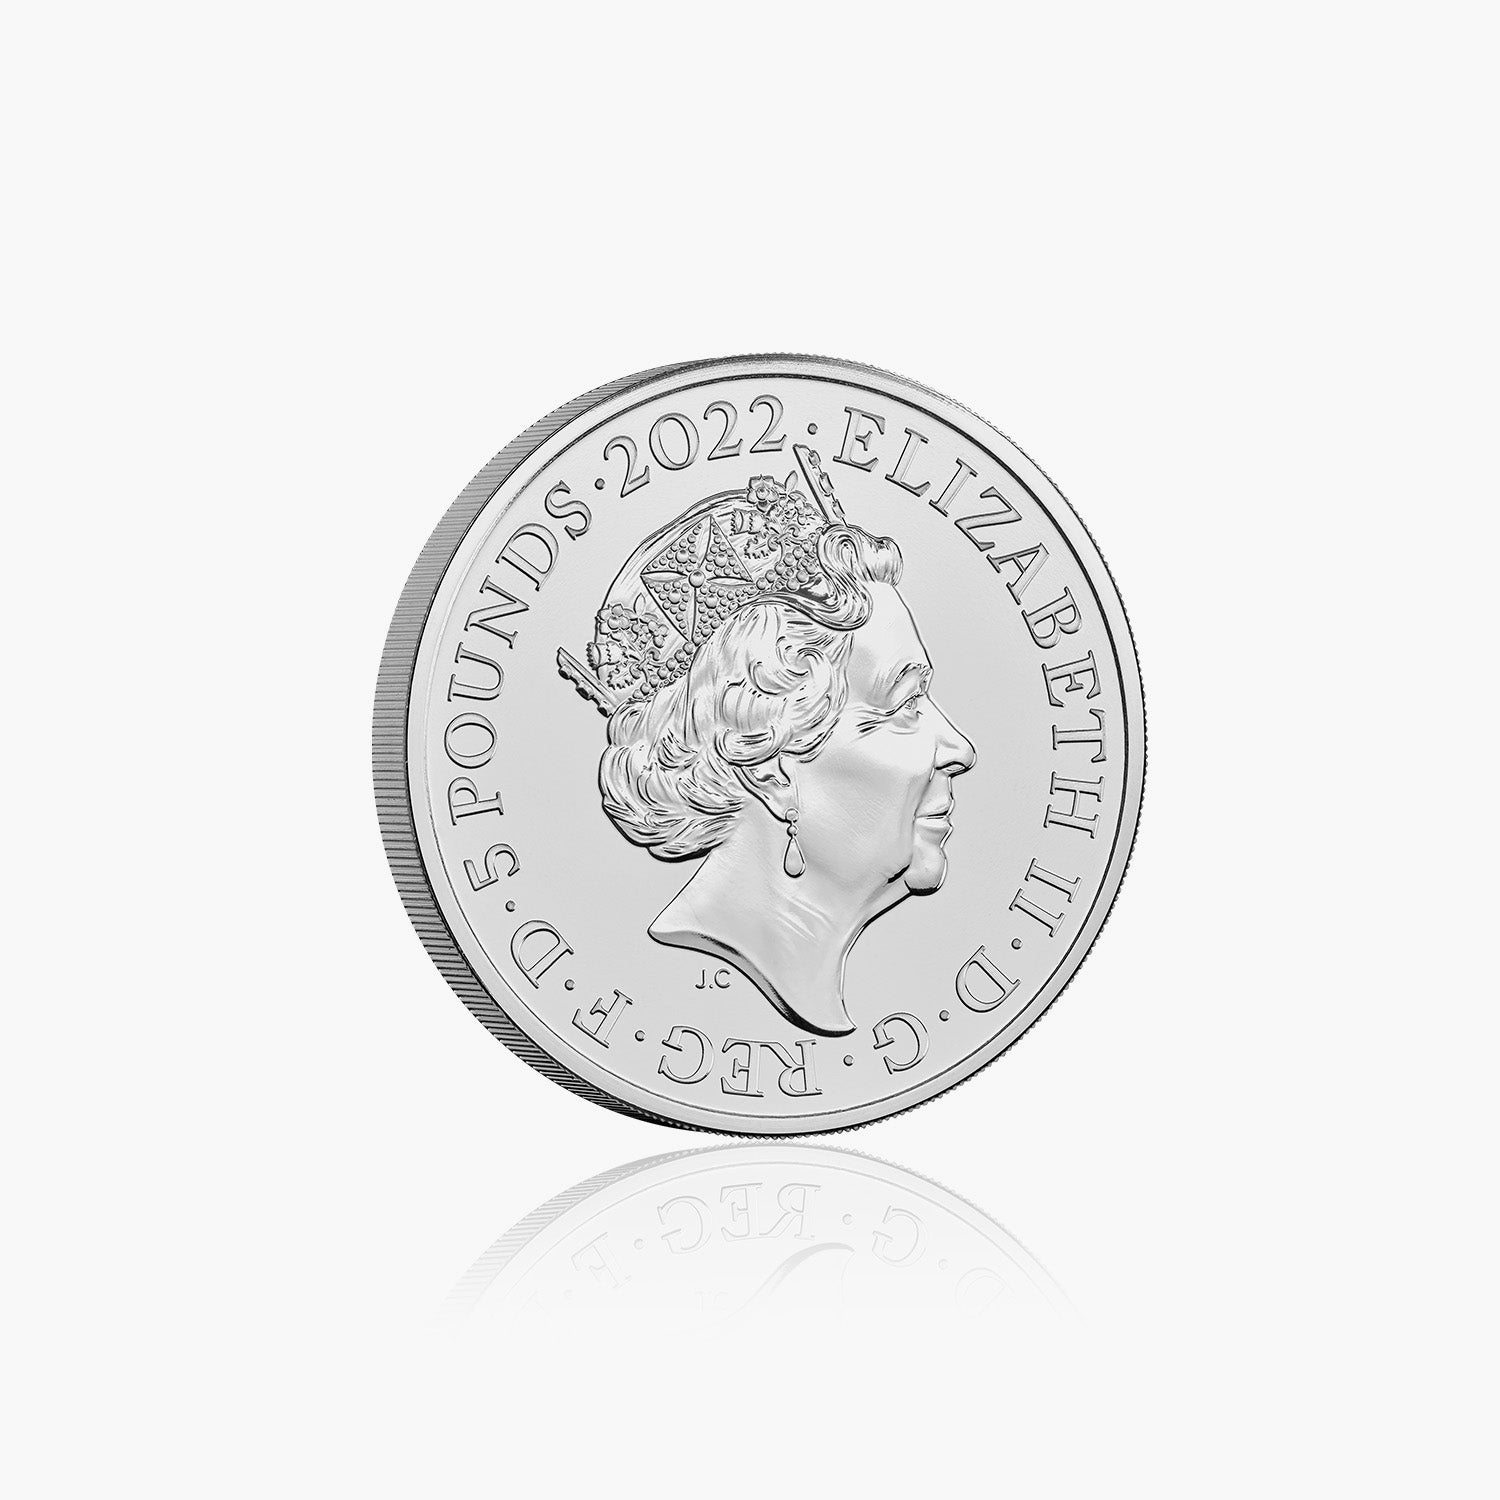 The Queen's Reign Honours and Investitures 2022 UK £5 BU Coin